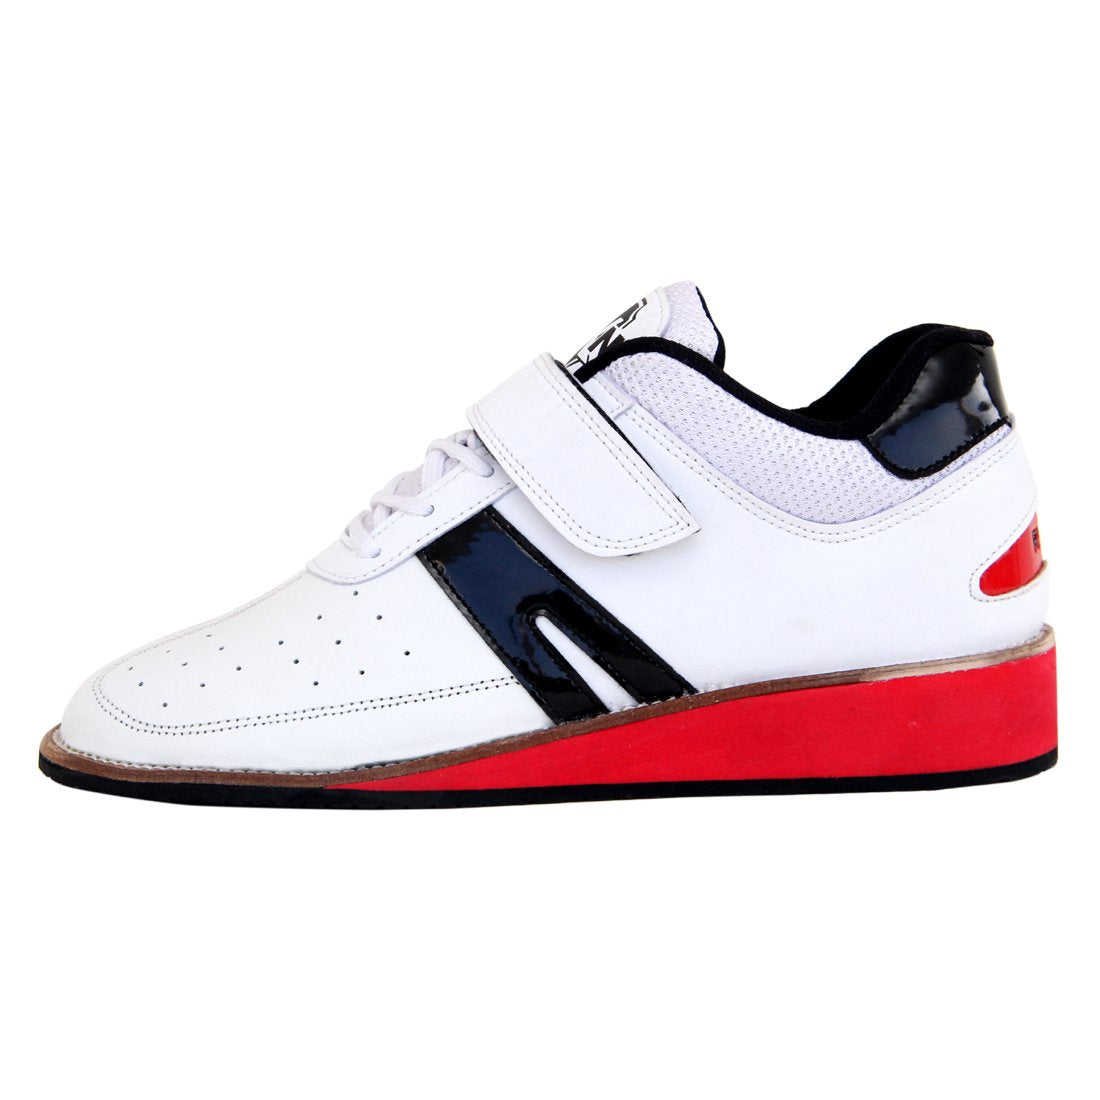 RXN WLS1 White Weightlifting Shoe